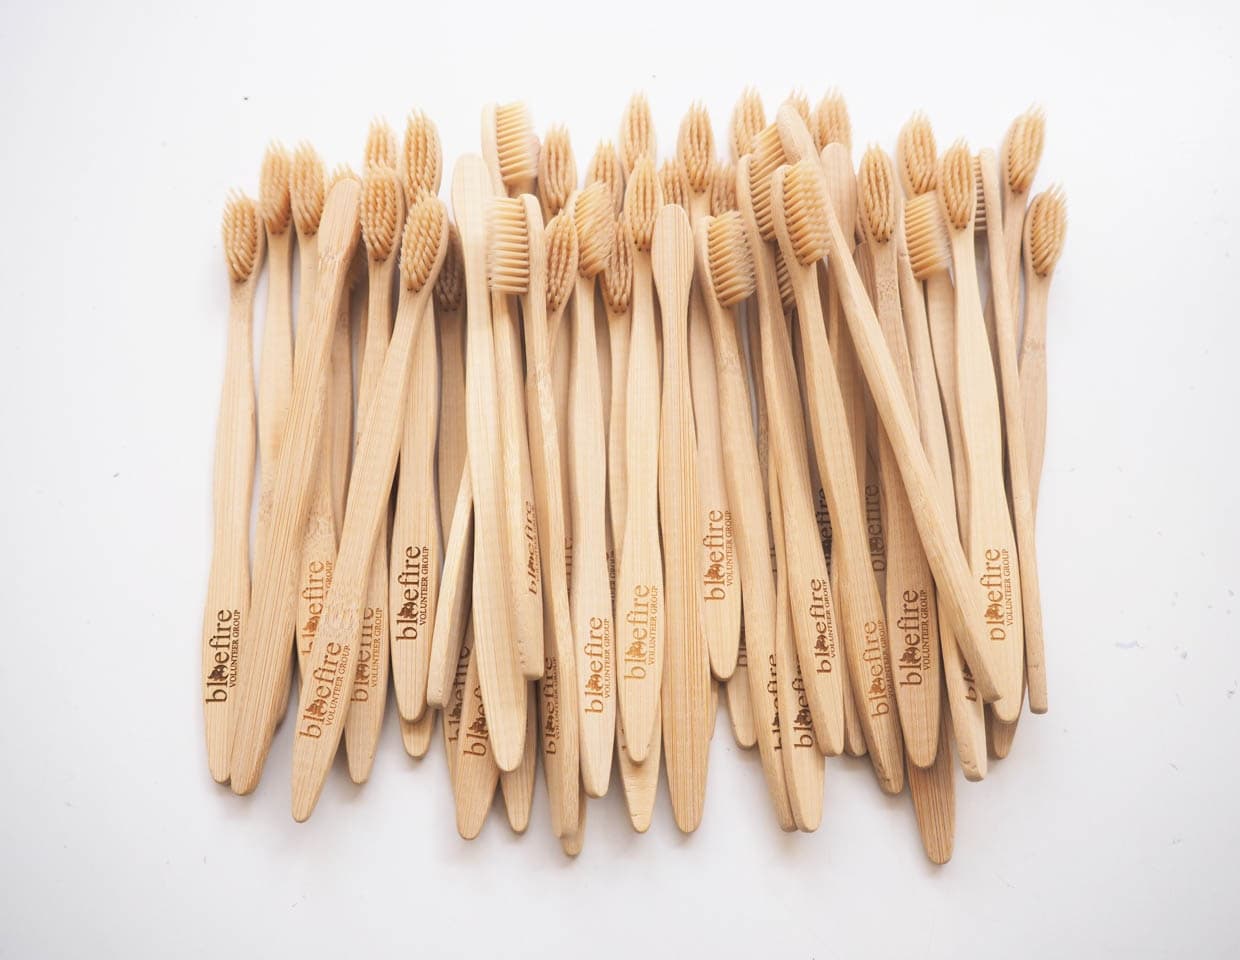 BAMBOO TOOTHBRUSH REUSABLE ECO FRIENDLY MADE FROM NATURAL BAMBOO WOOD